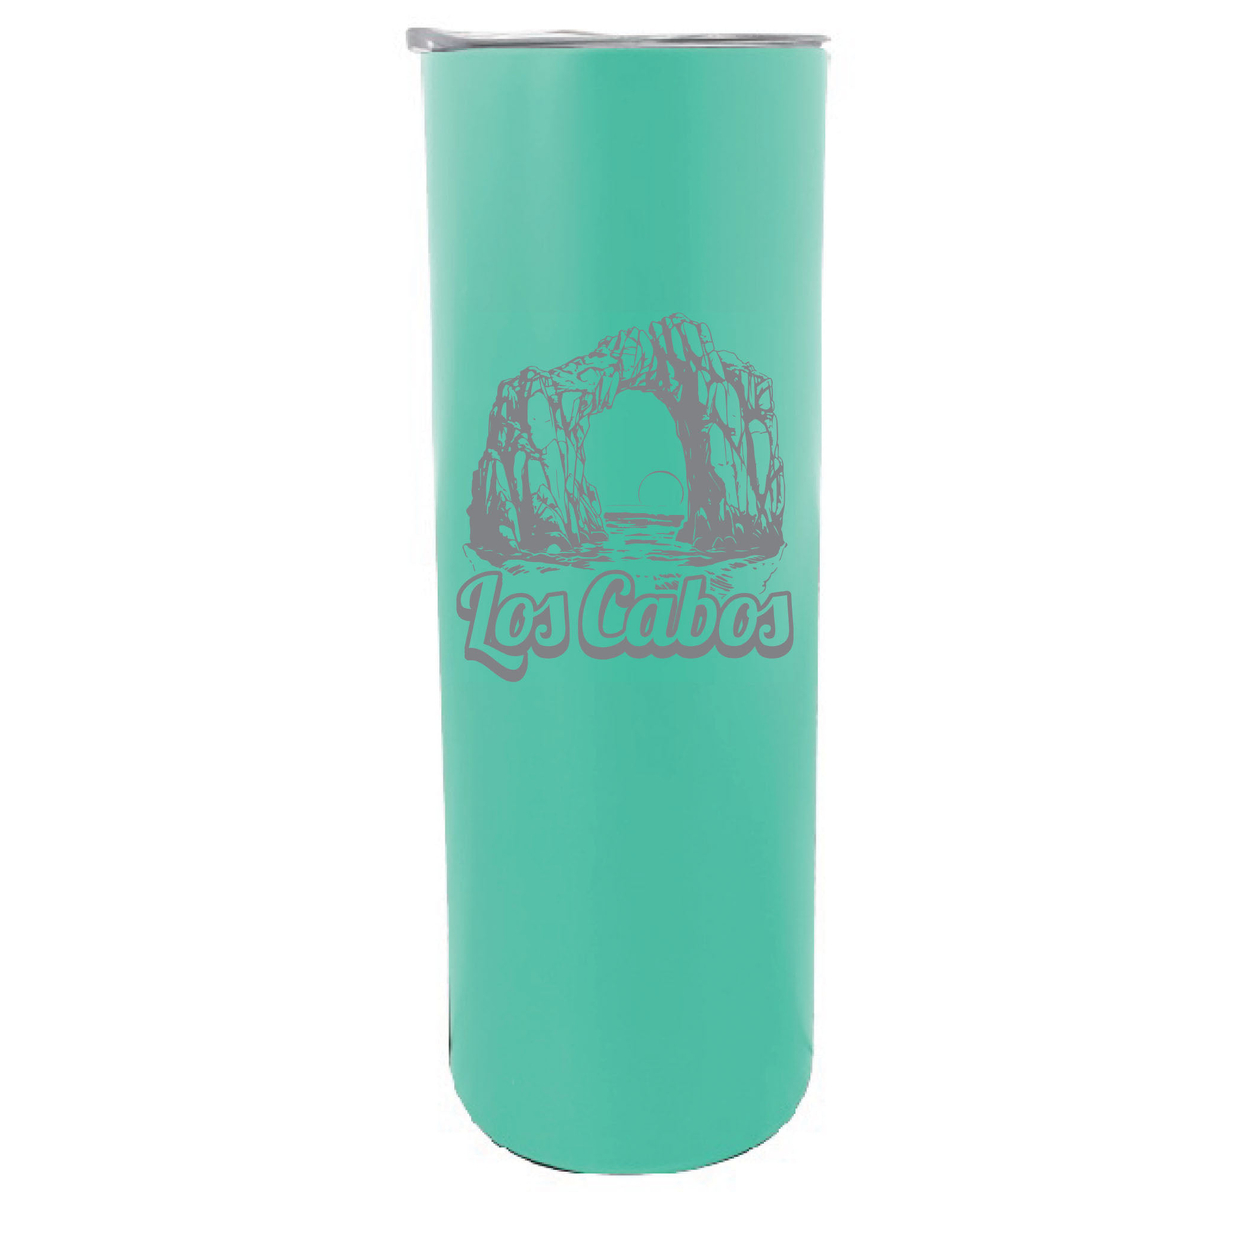 Los Cabos Mexico Souvenir 20 Oz Engraved Insulated Stainless Steel Skinny Tumbler - Gray Glitter,,Single Unit